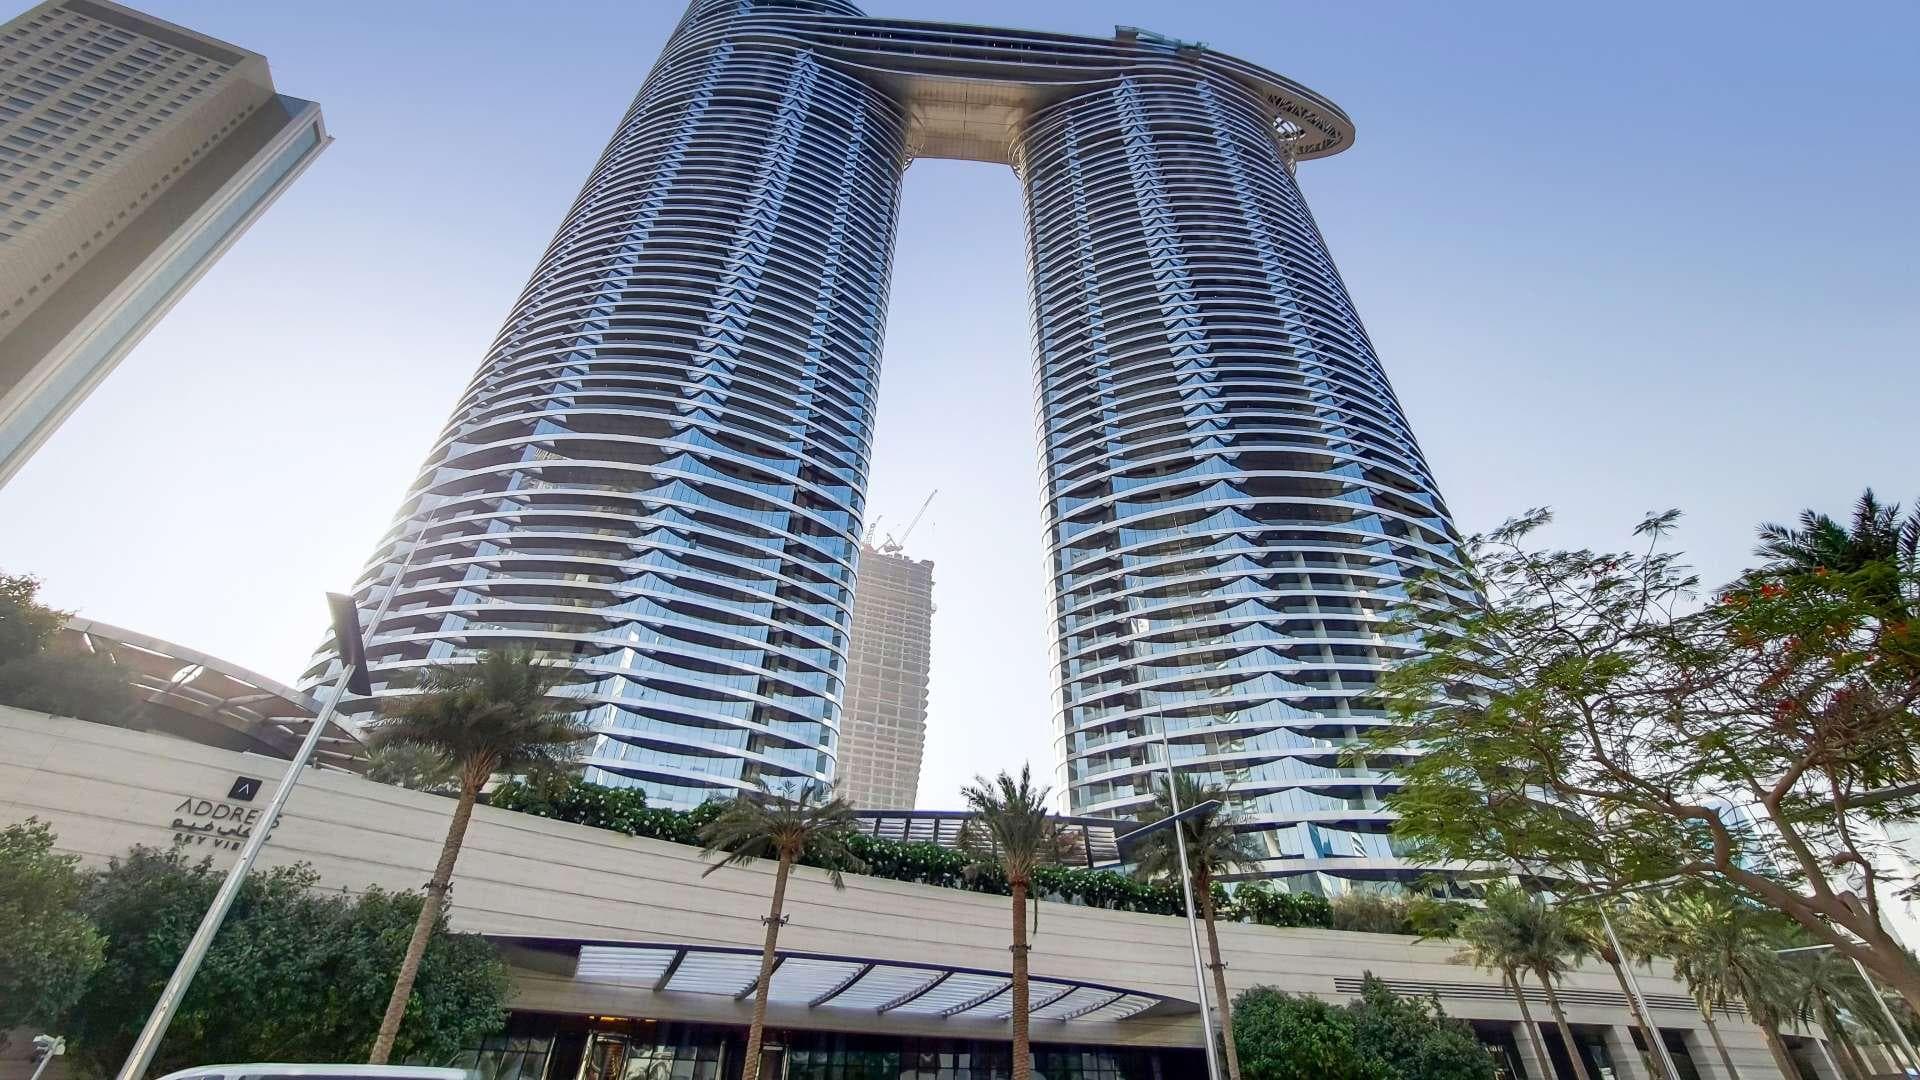 2 Bedroom Apartment For Sale The Address Sky View Towers Lp16402 2a51d92bcf0ae800.jpg